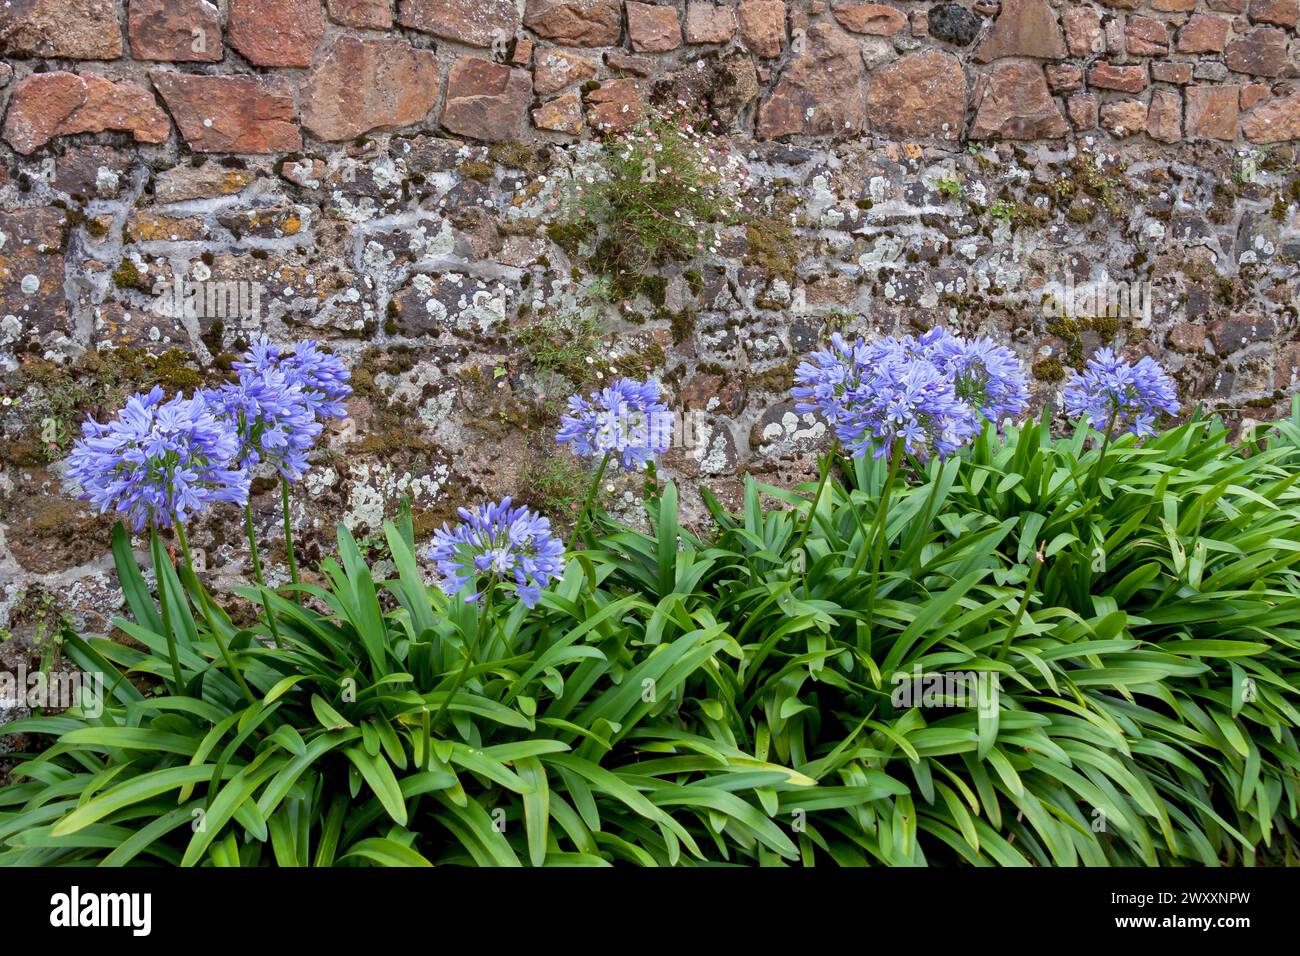 Lilies of the nile (Agapanthus) in front of a granite wall and mexican fleabane (Erigeron karvinskianus) or wall daisy, Brittany, France Stock Photo